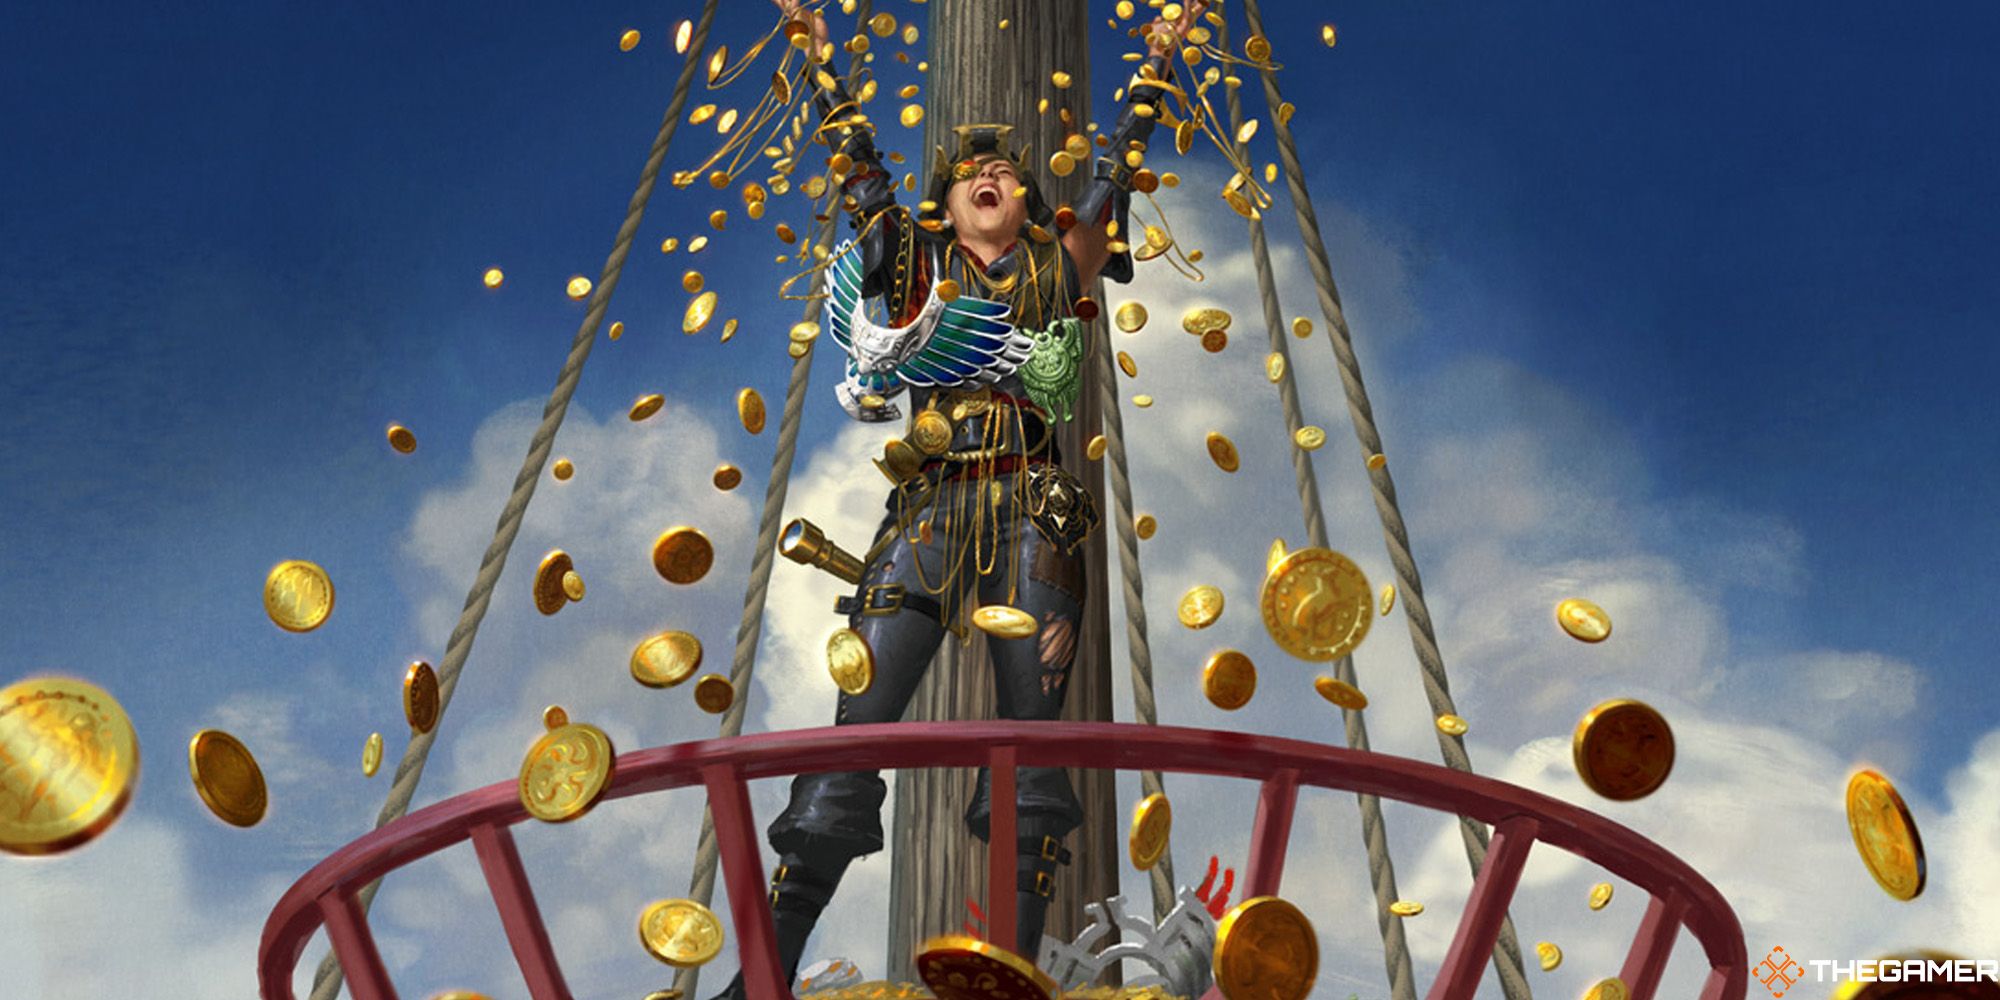 A pirate throwing handfulls of gold coins.